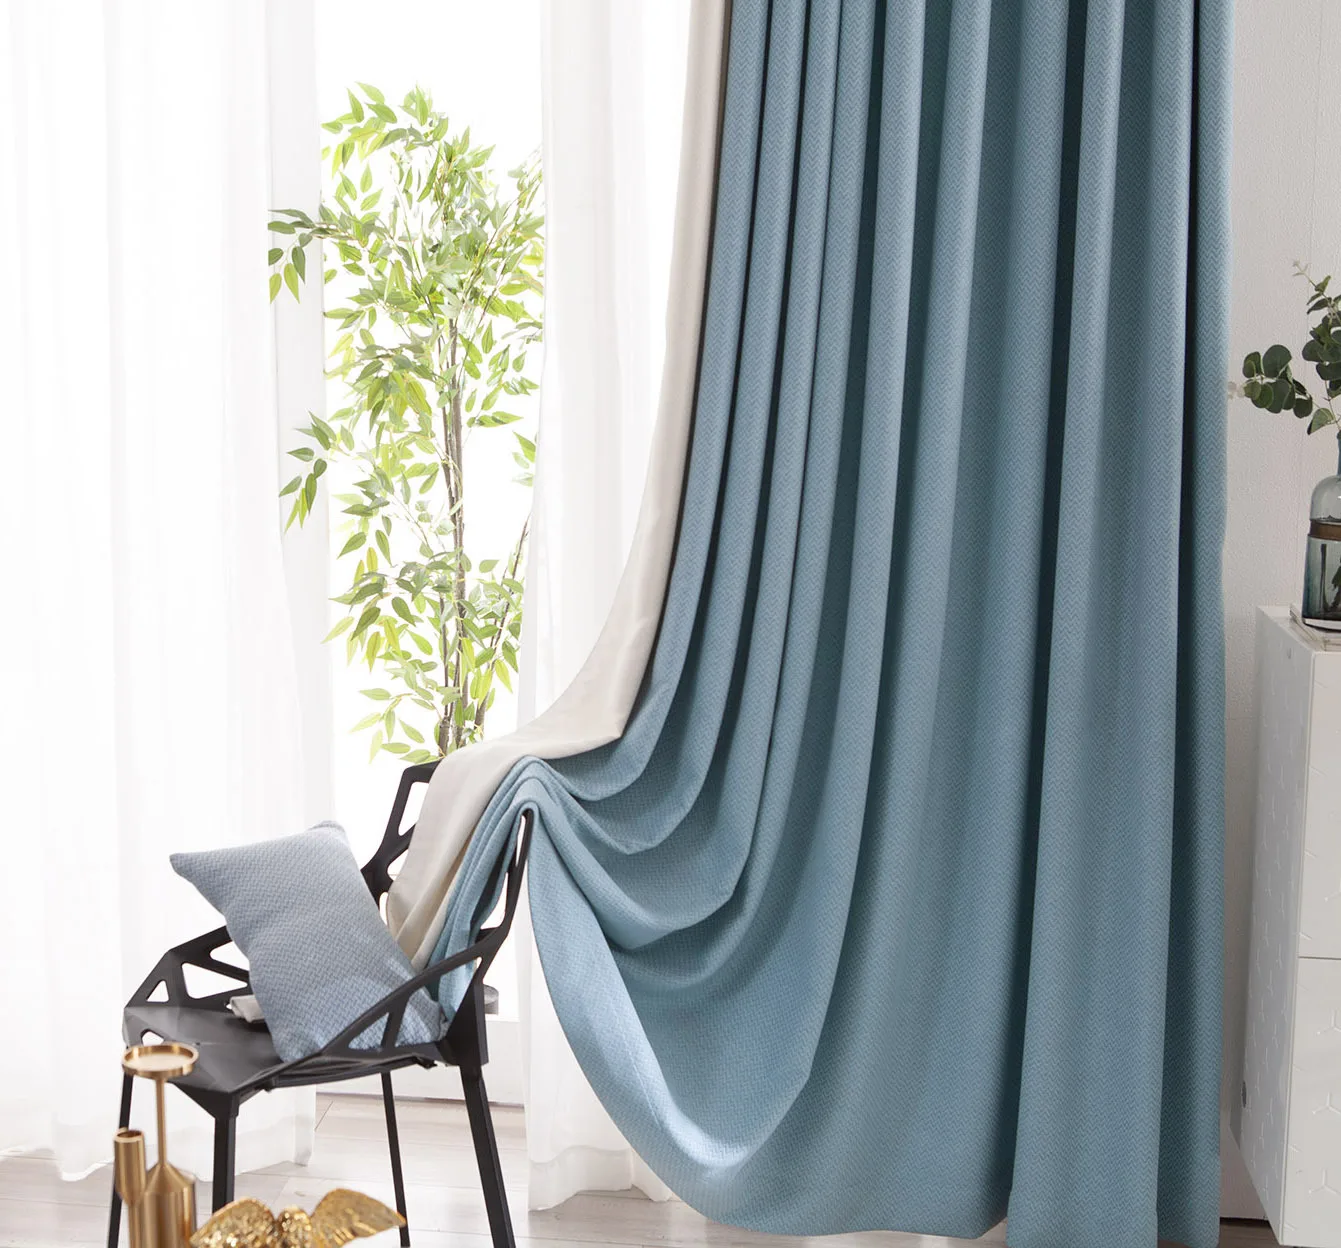 Hot Sell curtains drapes cloth living room Jacquard Design luxury curtains for the living room